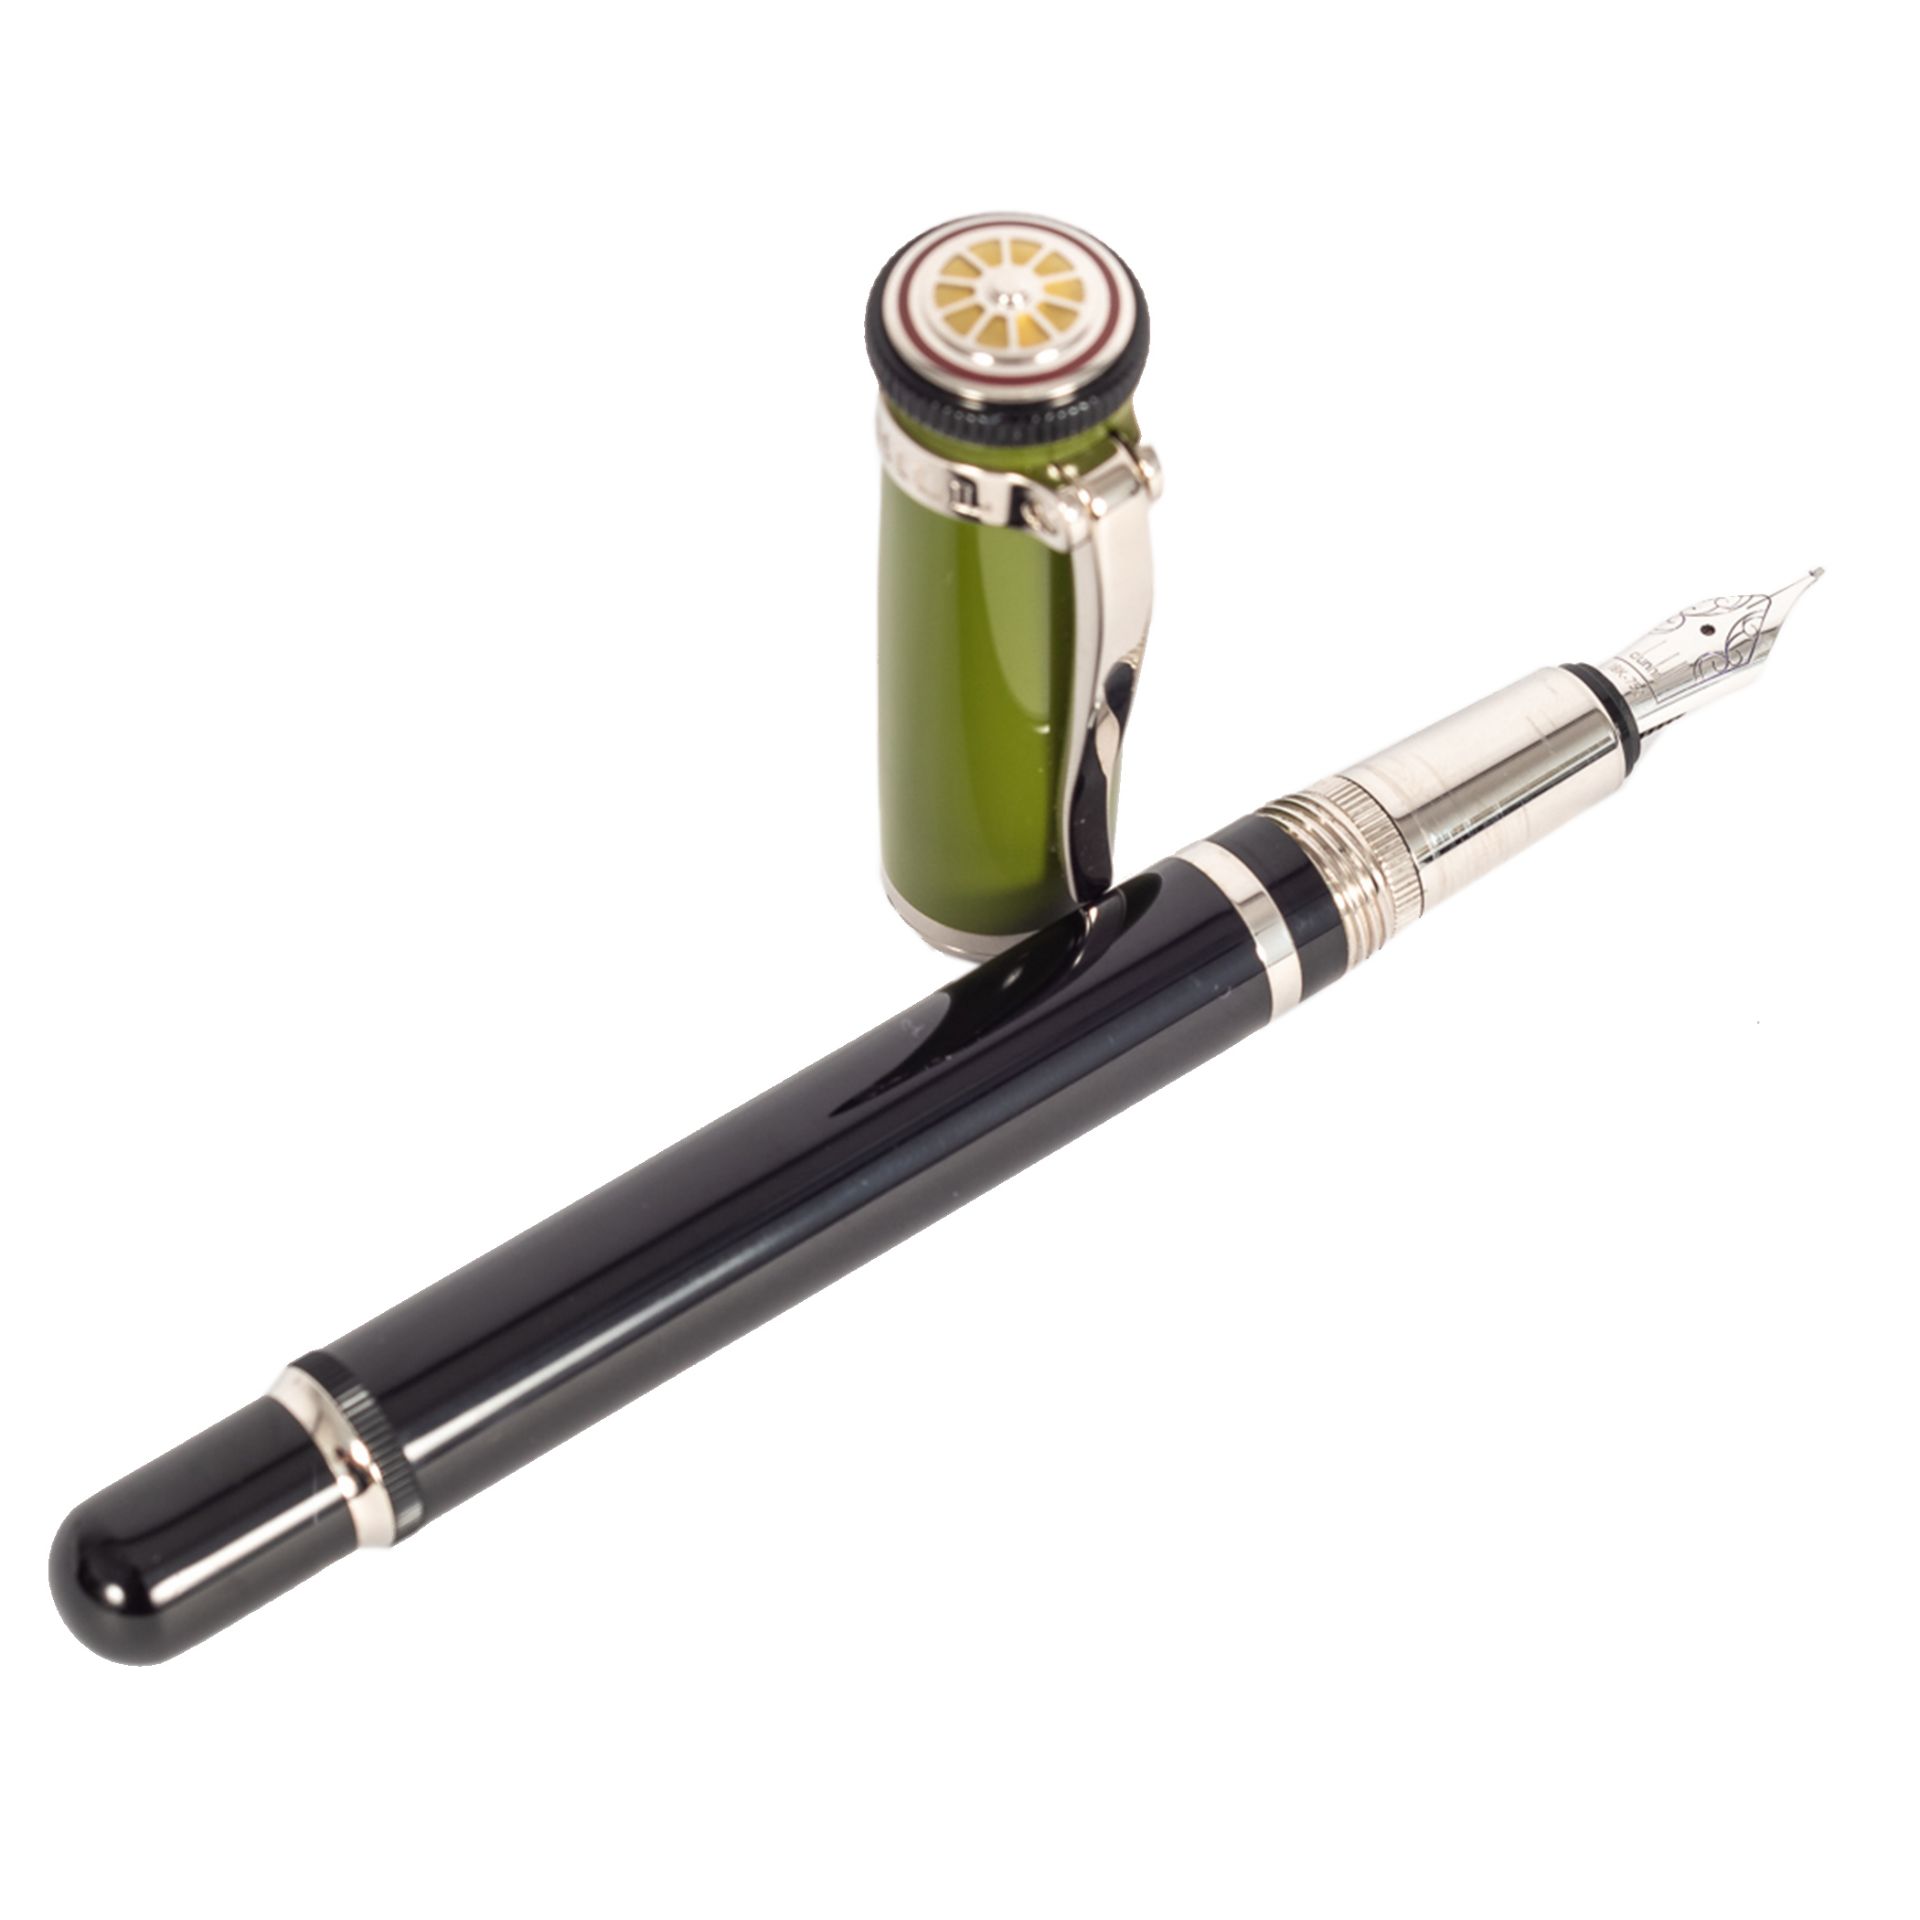 Alfred Dunhill Sentryman collection Flying Scotsman fountain pen. - Image 2 of 4